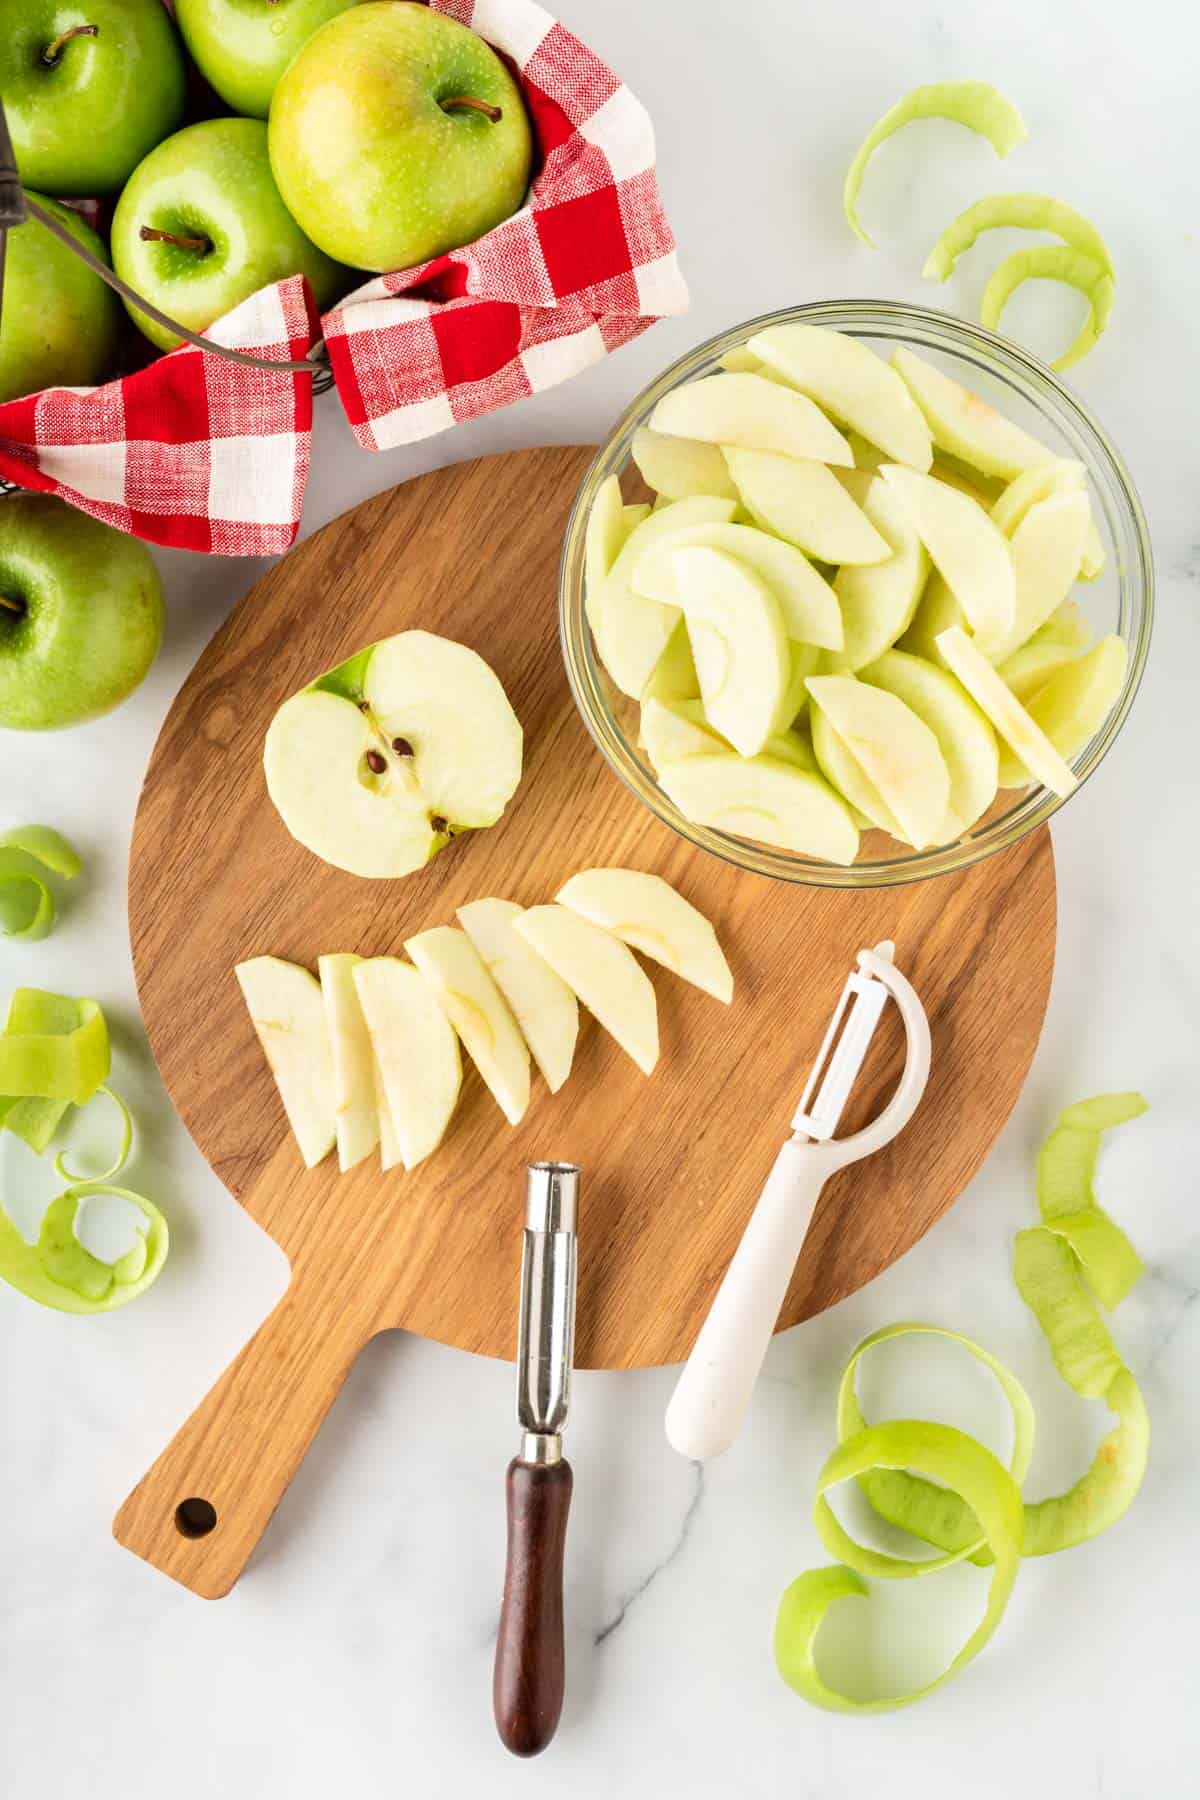 cutting apples into slices